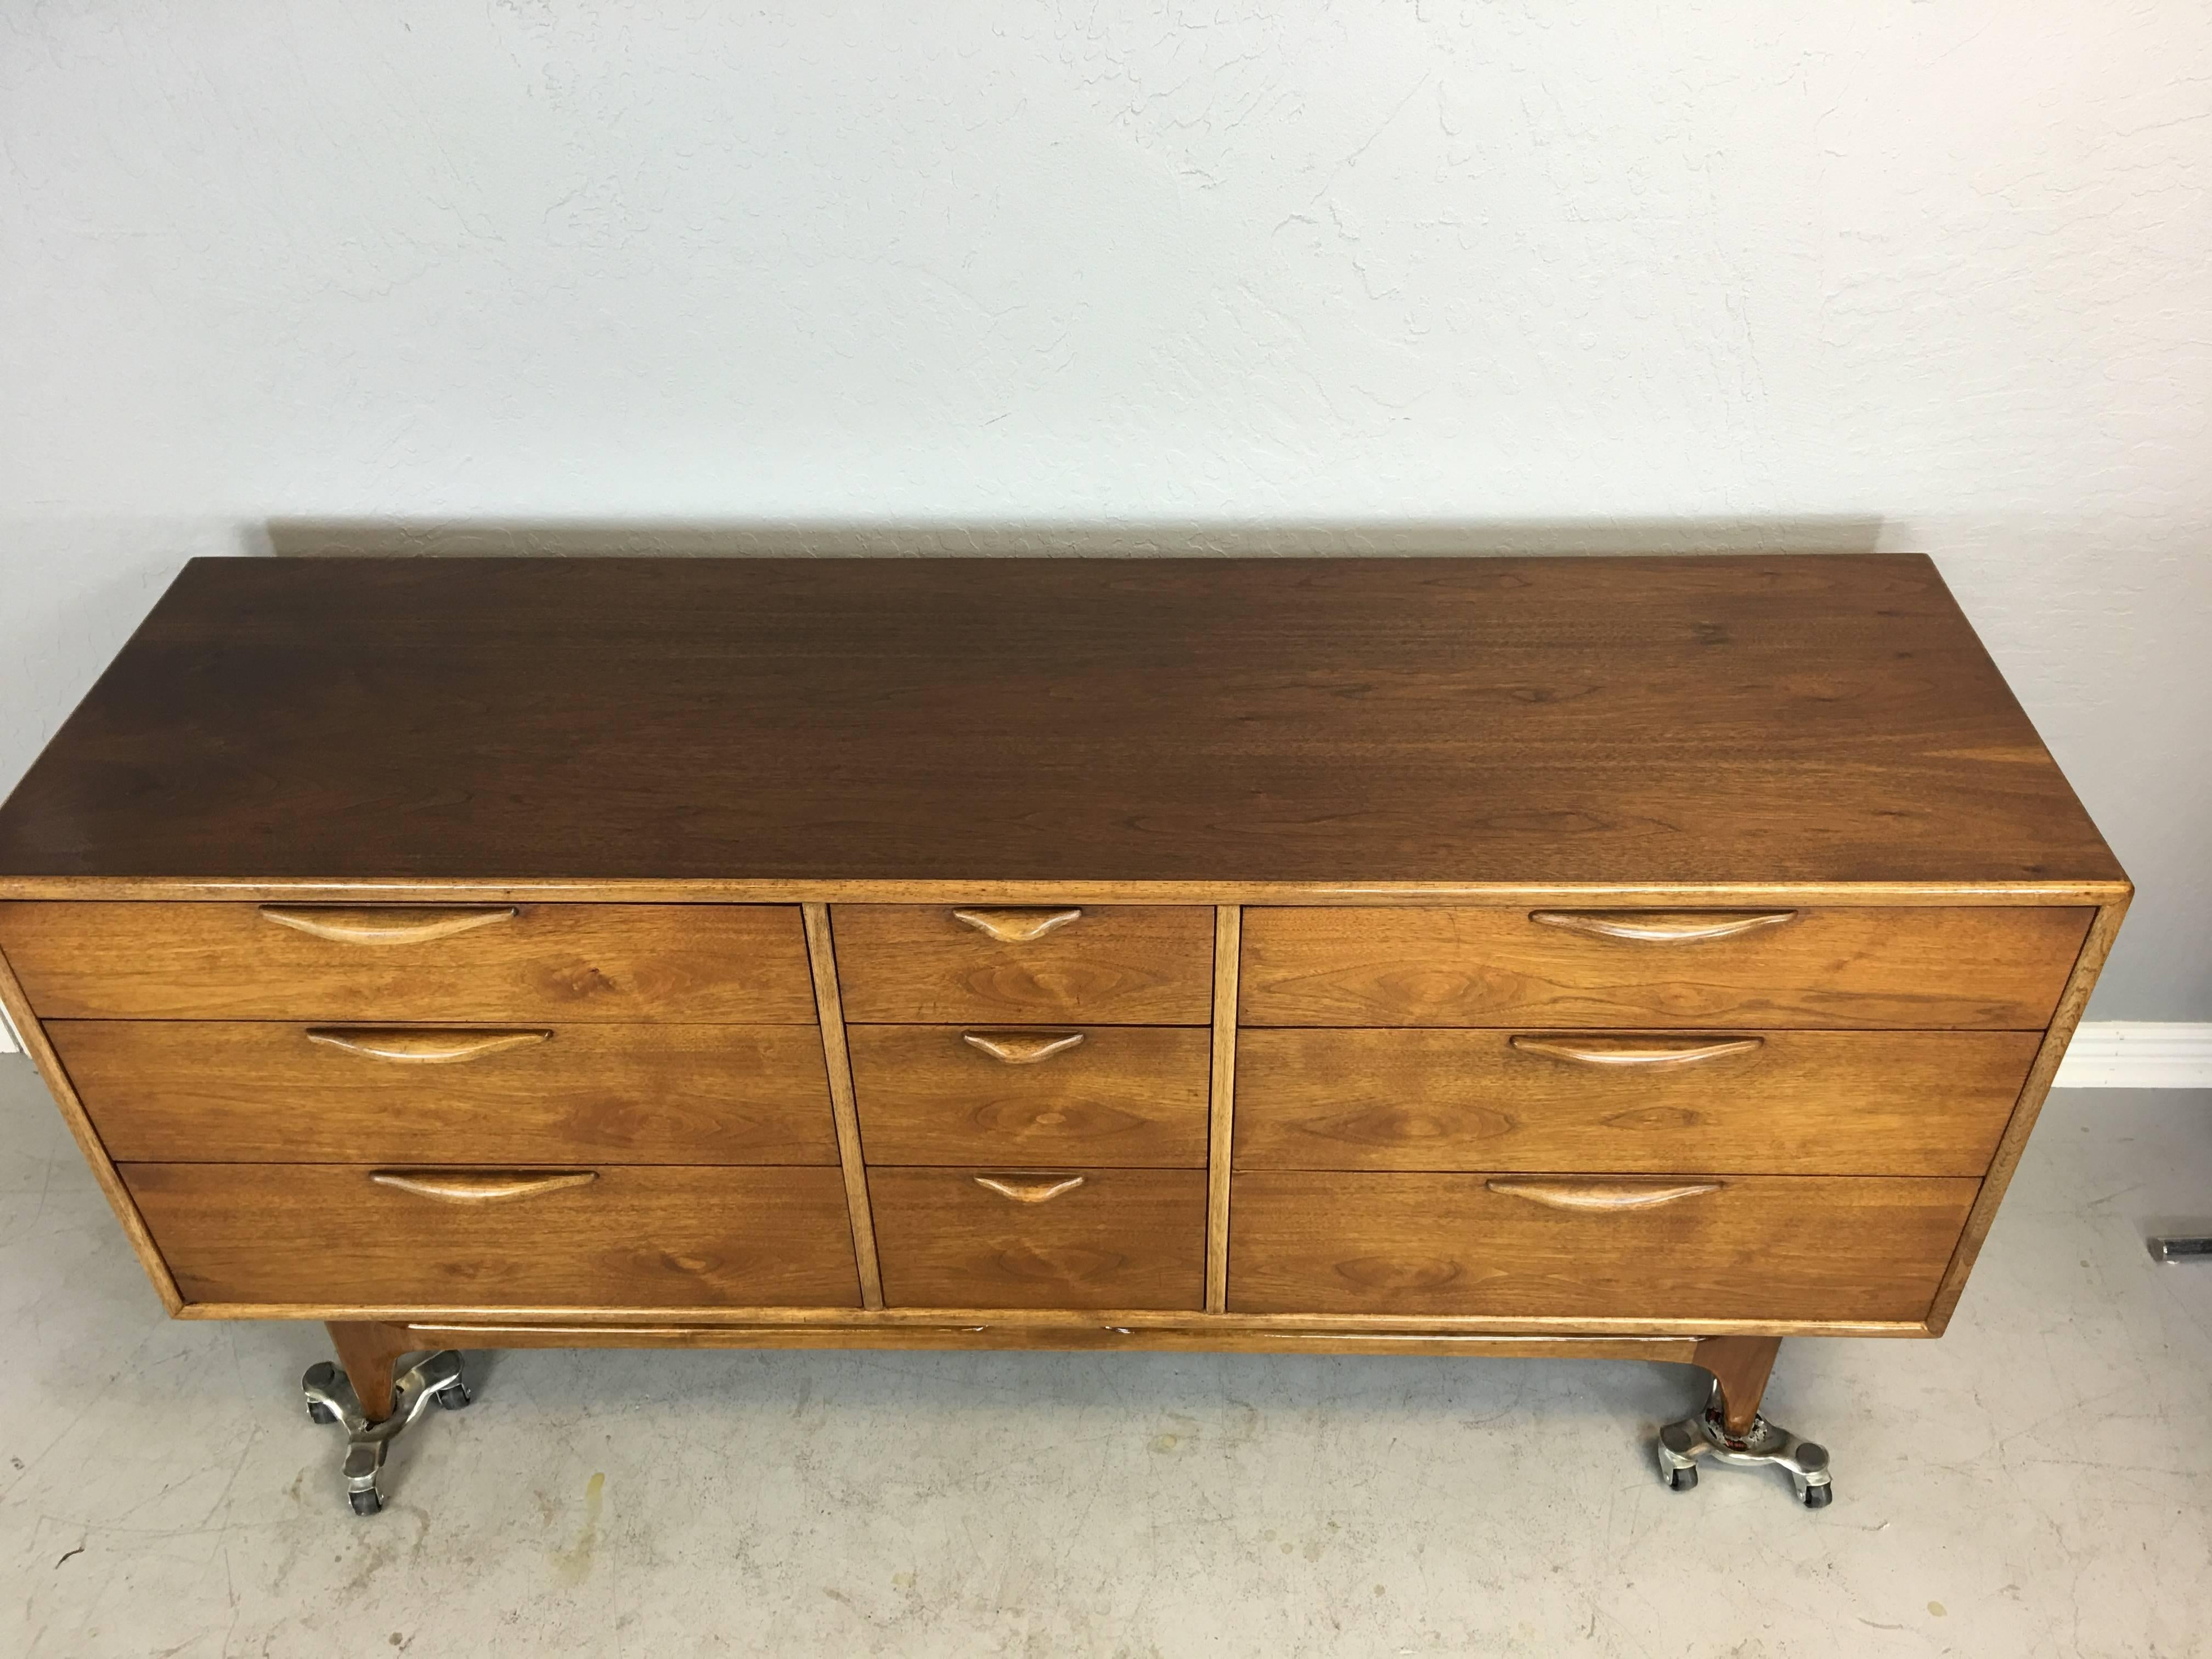 Lane low boy long walnut dresser with ash banding on edges. Marked Lane inside of top left drawer. Dovetail joints on all drawers with poplar wood drawer guides, circa 1965. Excellent condition as this piece has been completely restored. No pets or